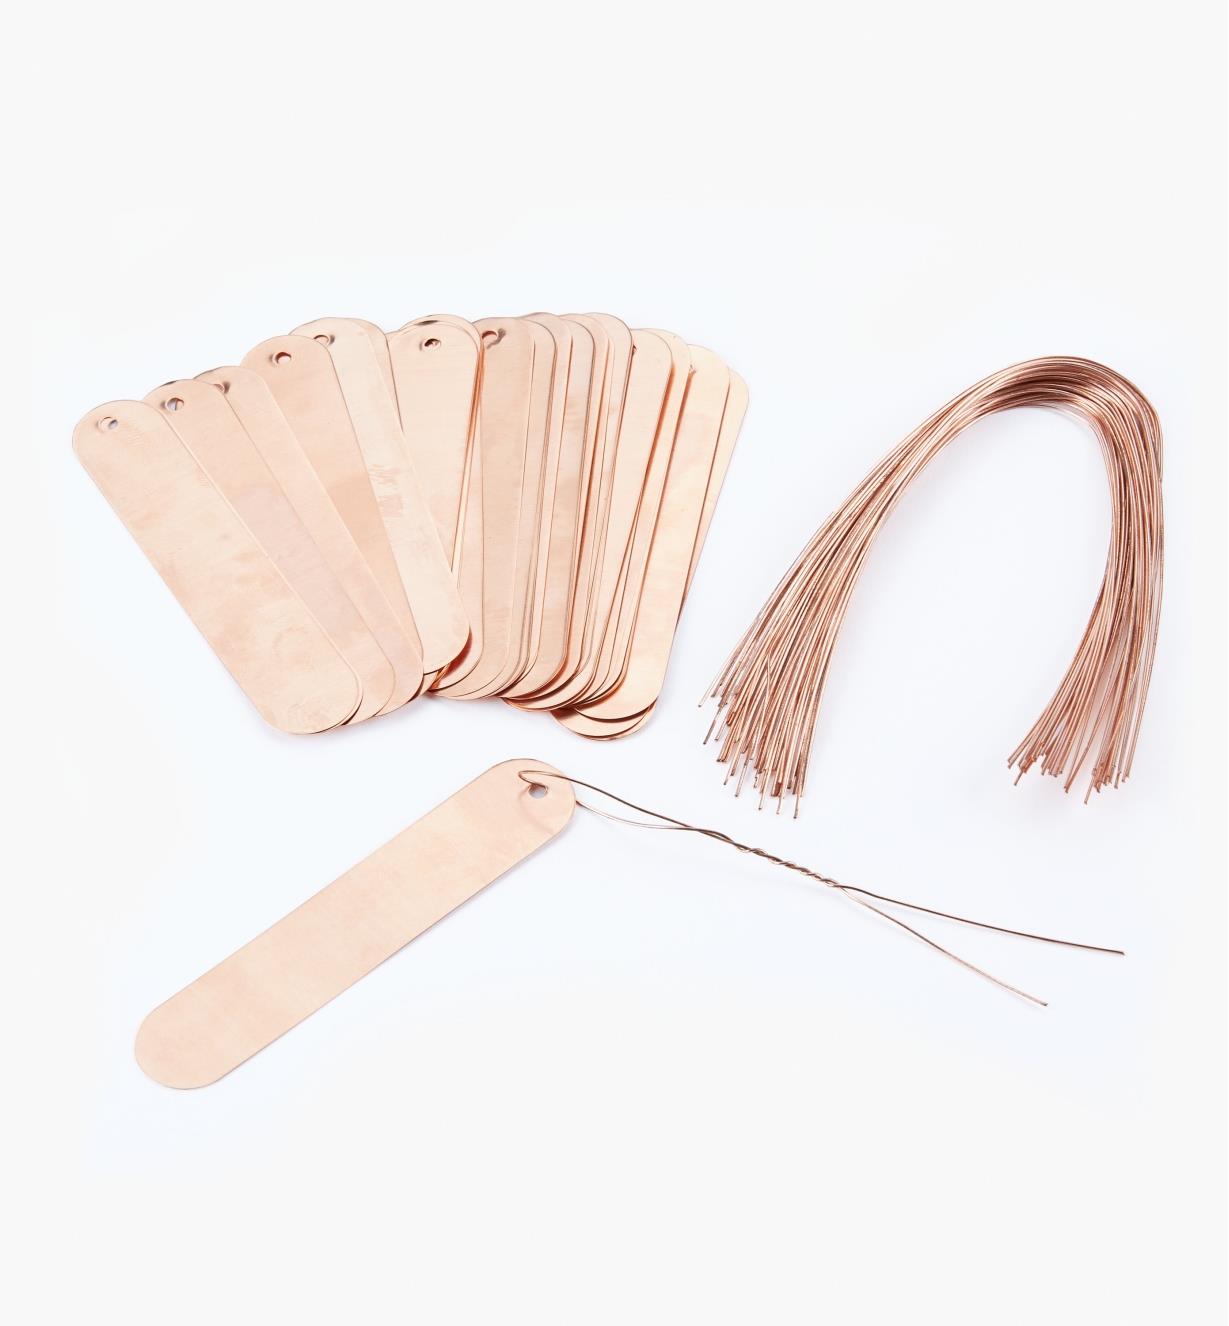 100 ~ Copper Plant Tags W/Eyelet & Copper Tie 3 3/4 x 3/4 Thickness .005" 